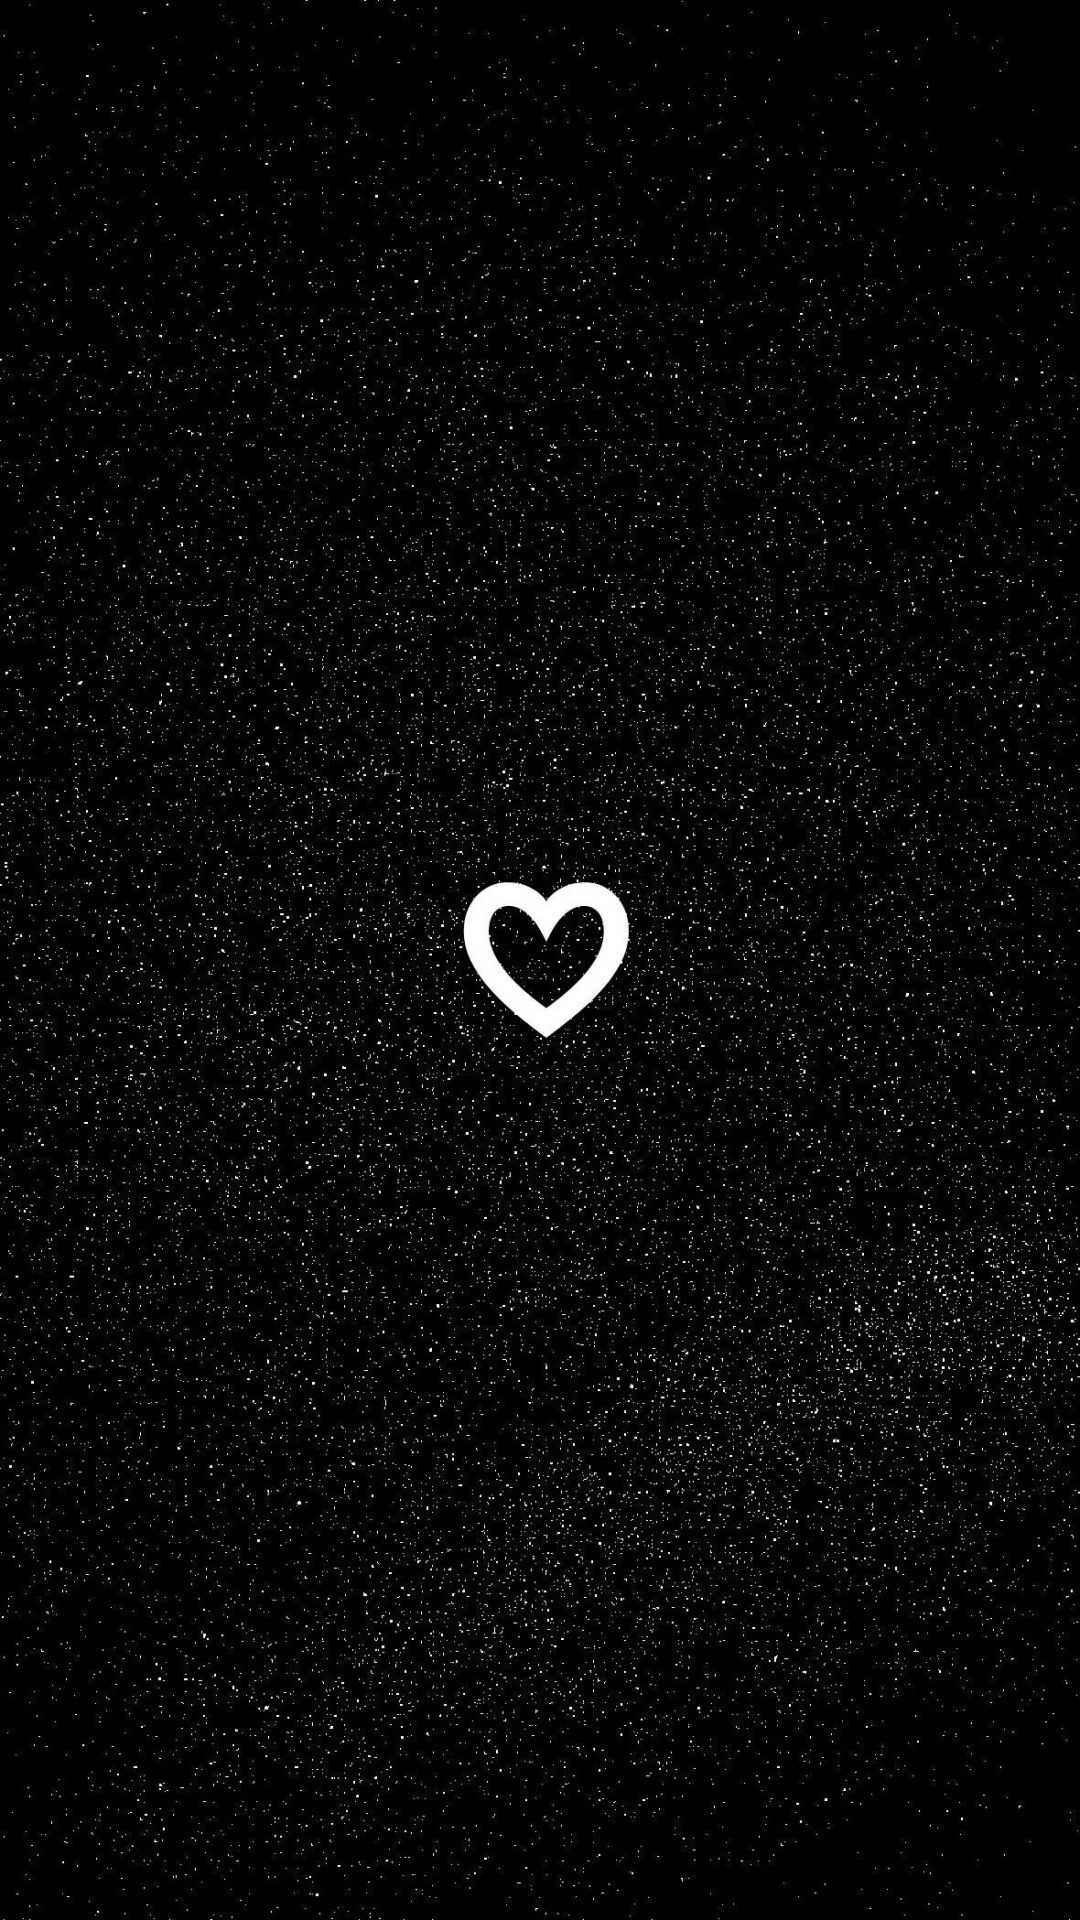 A white heart on a black background - Heart